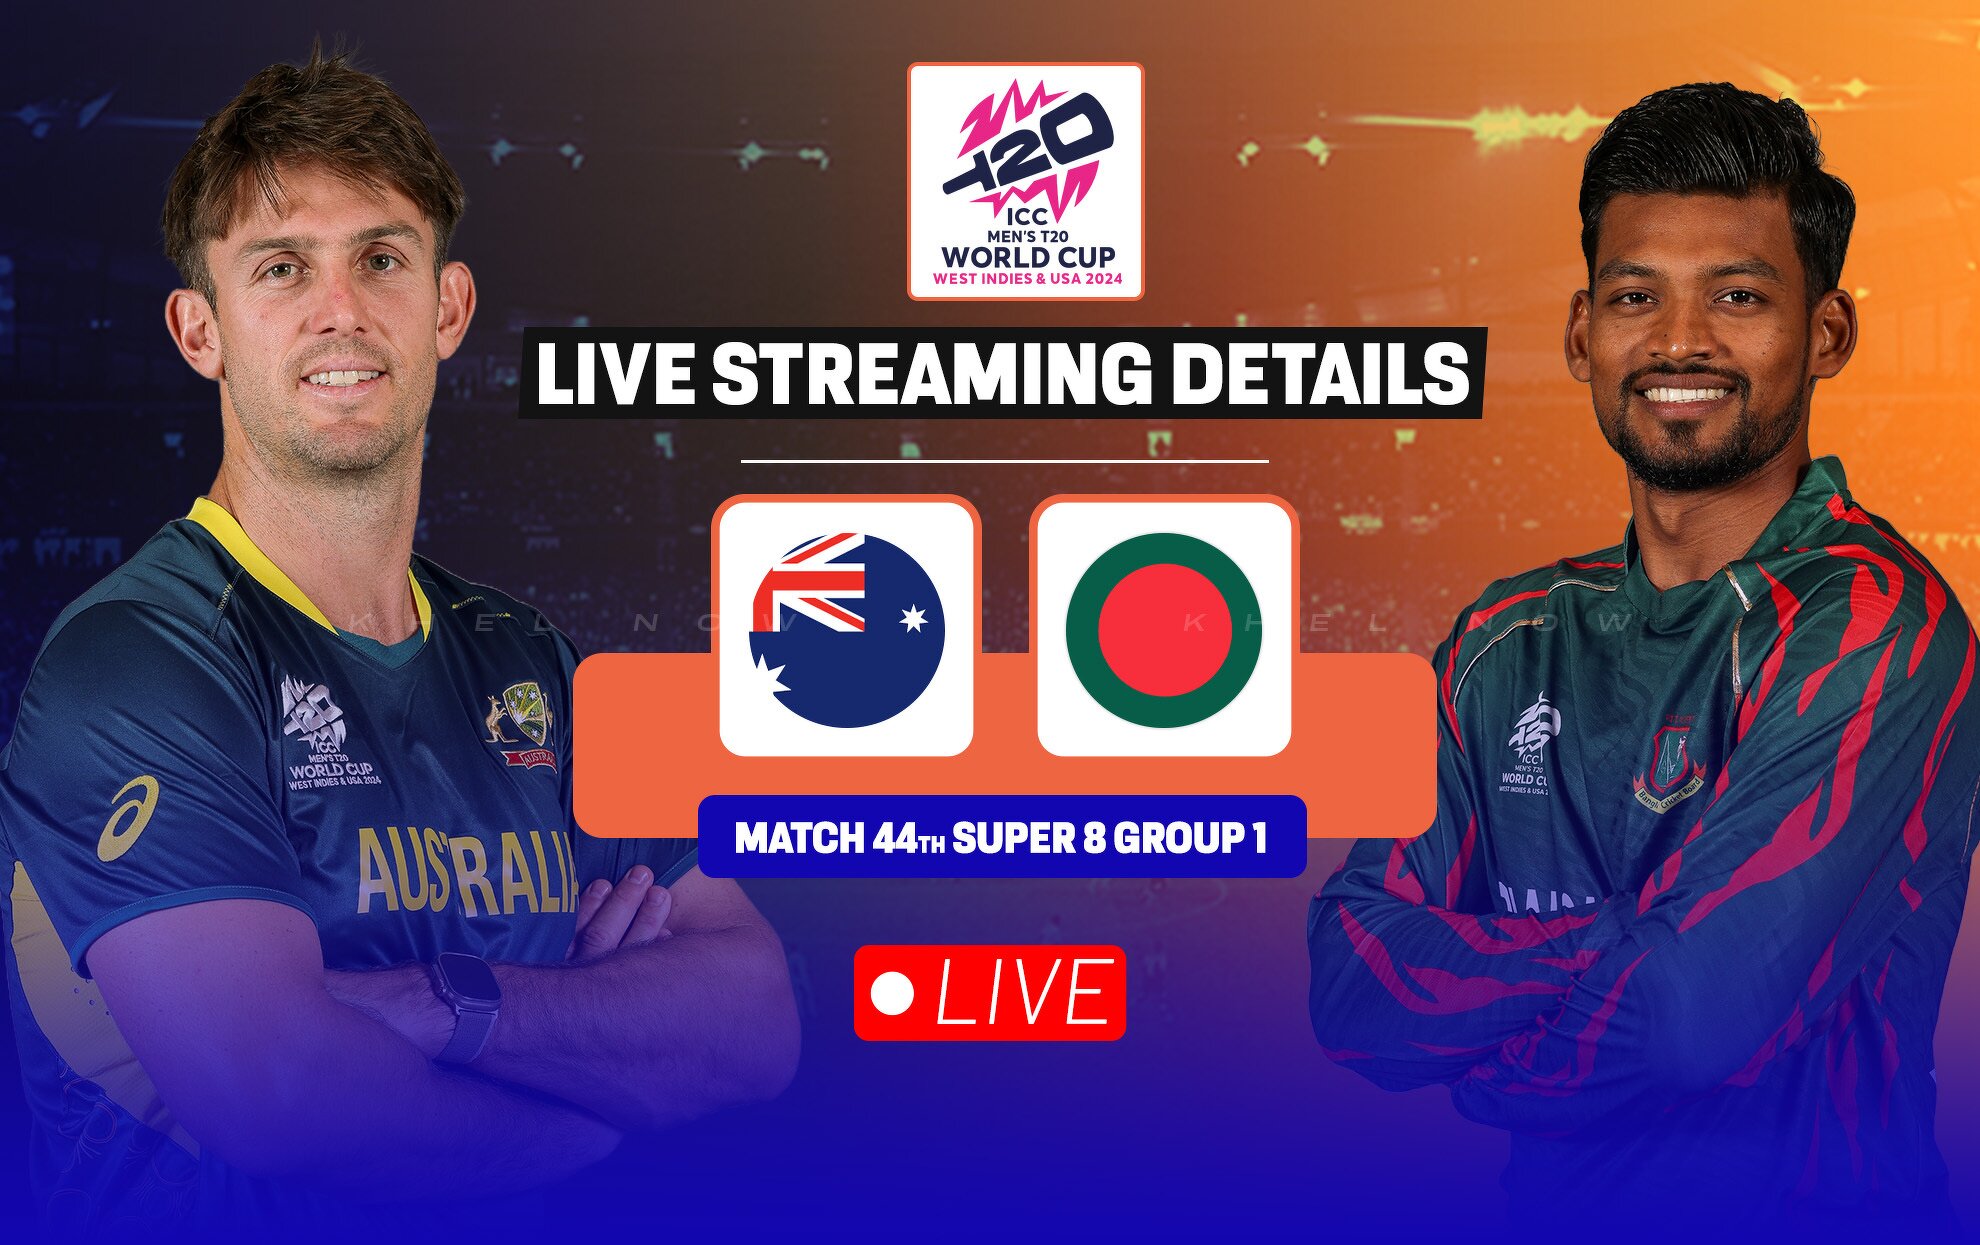 AUS vs BAN Live streaming details, when and where to watch match 44 of